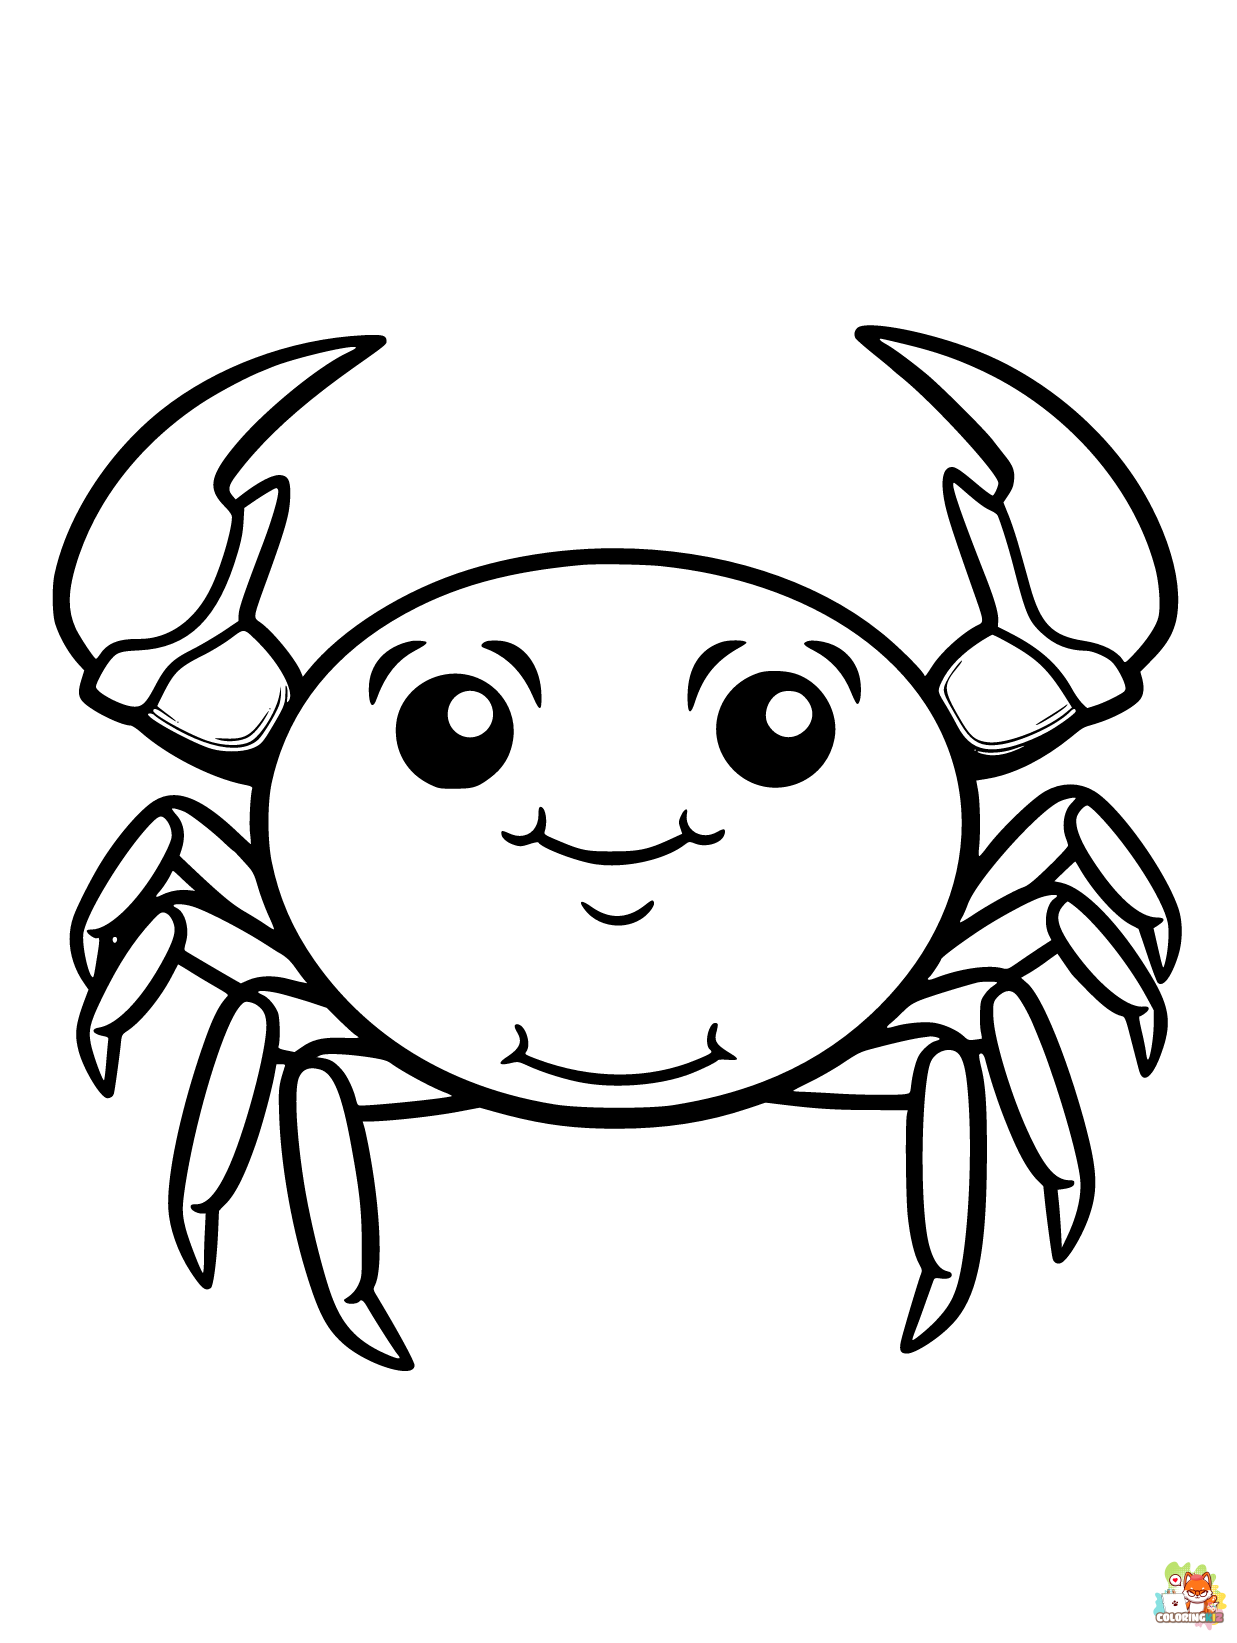 Crab coloring pages printable free